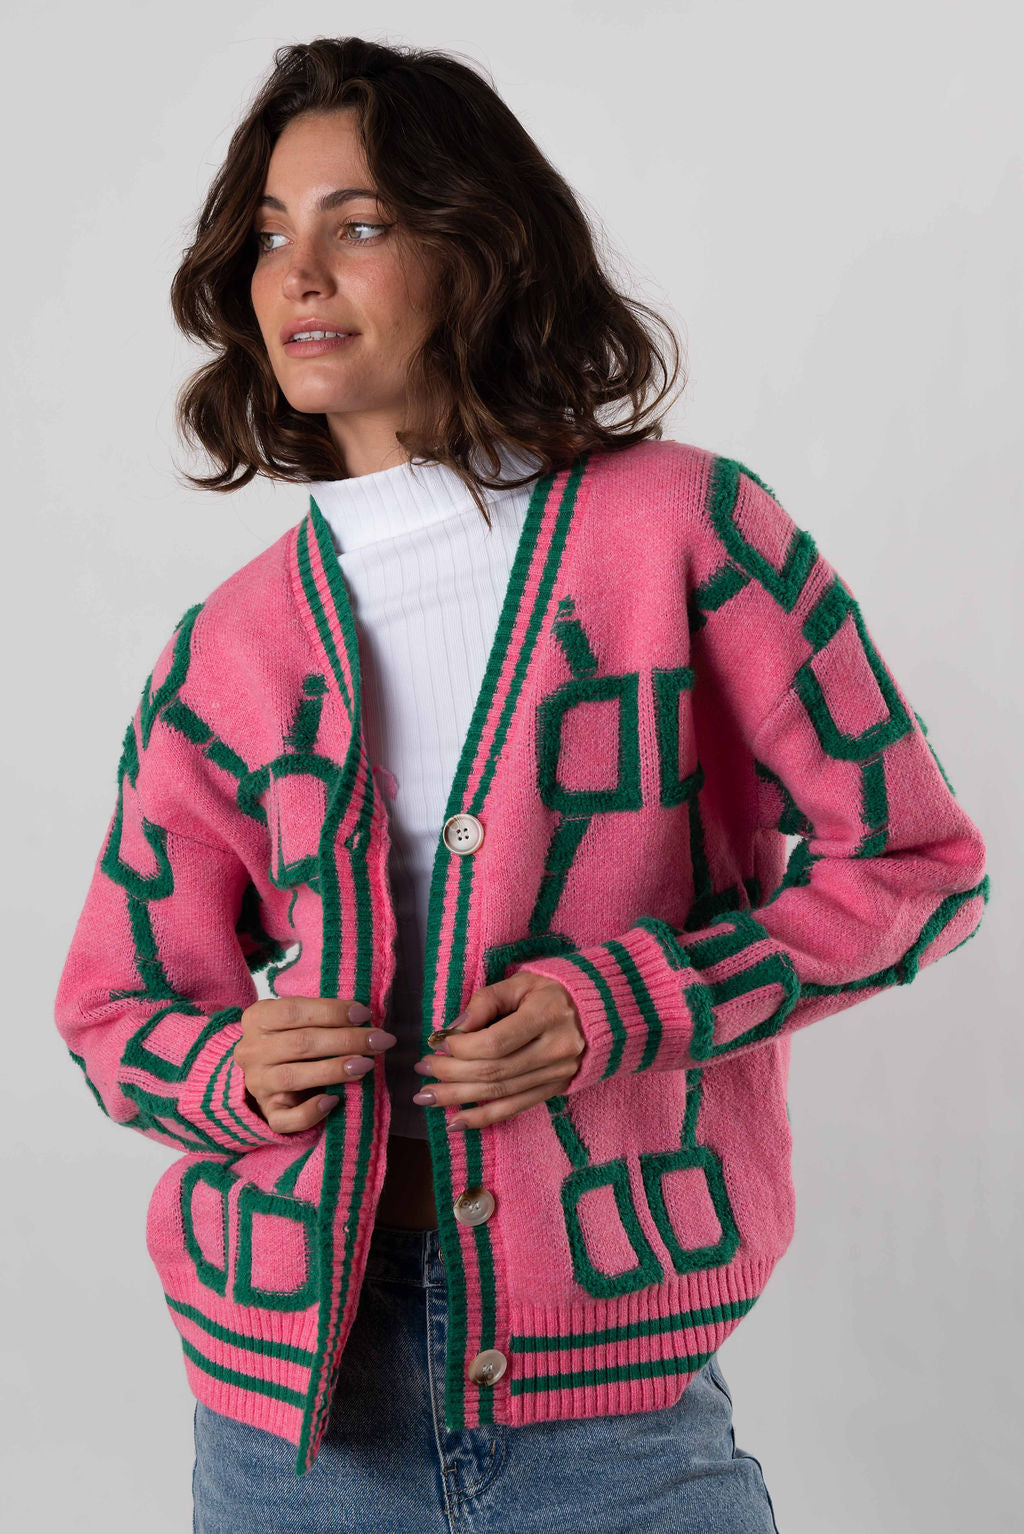 Any Which Way Cardigan In Pink/Green